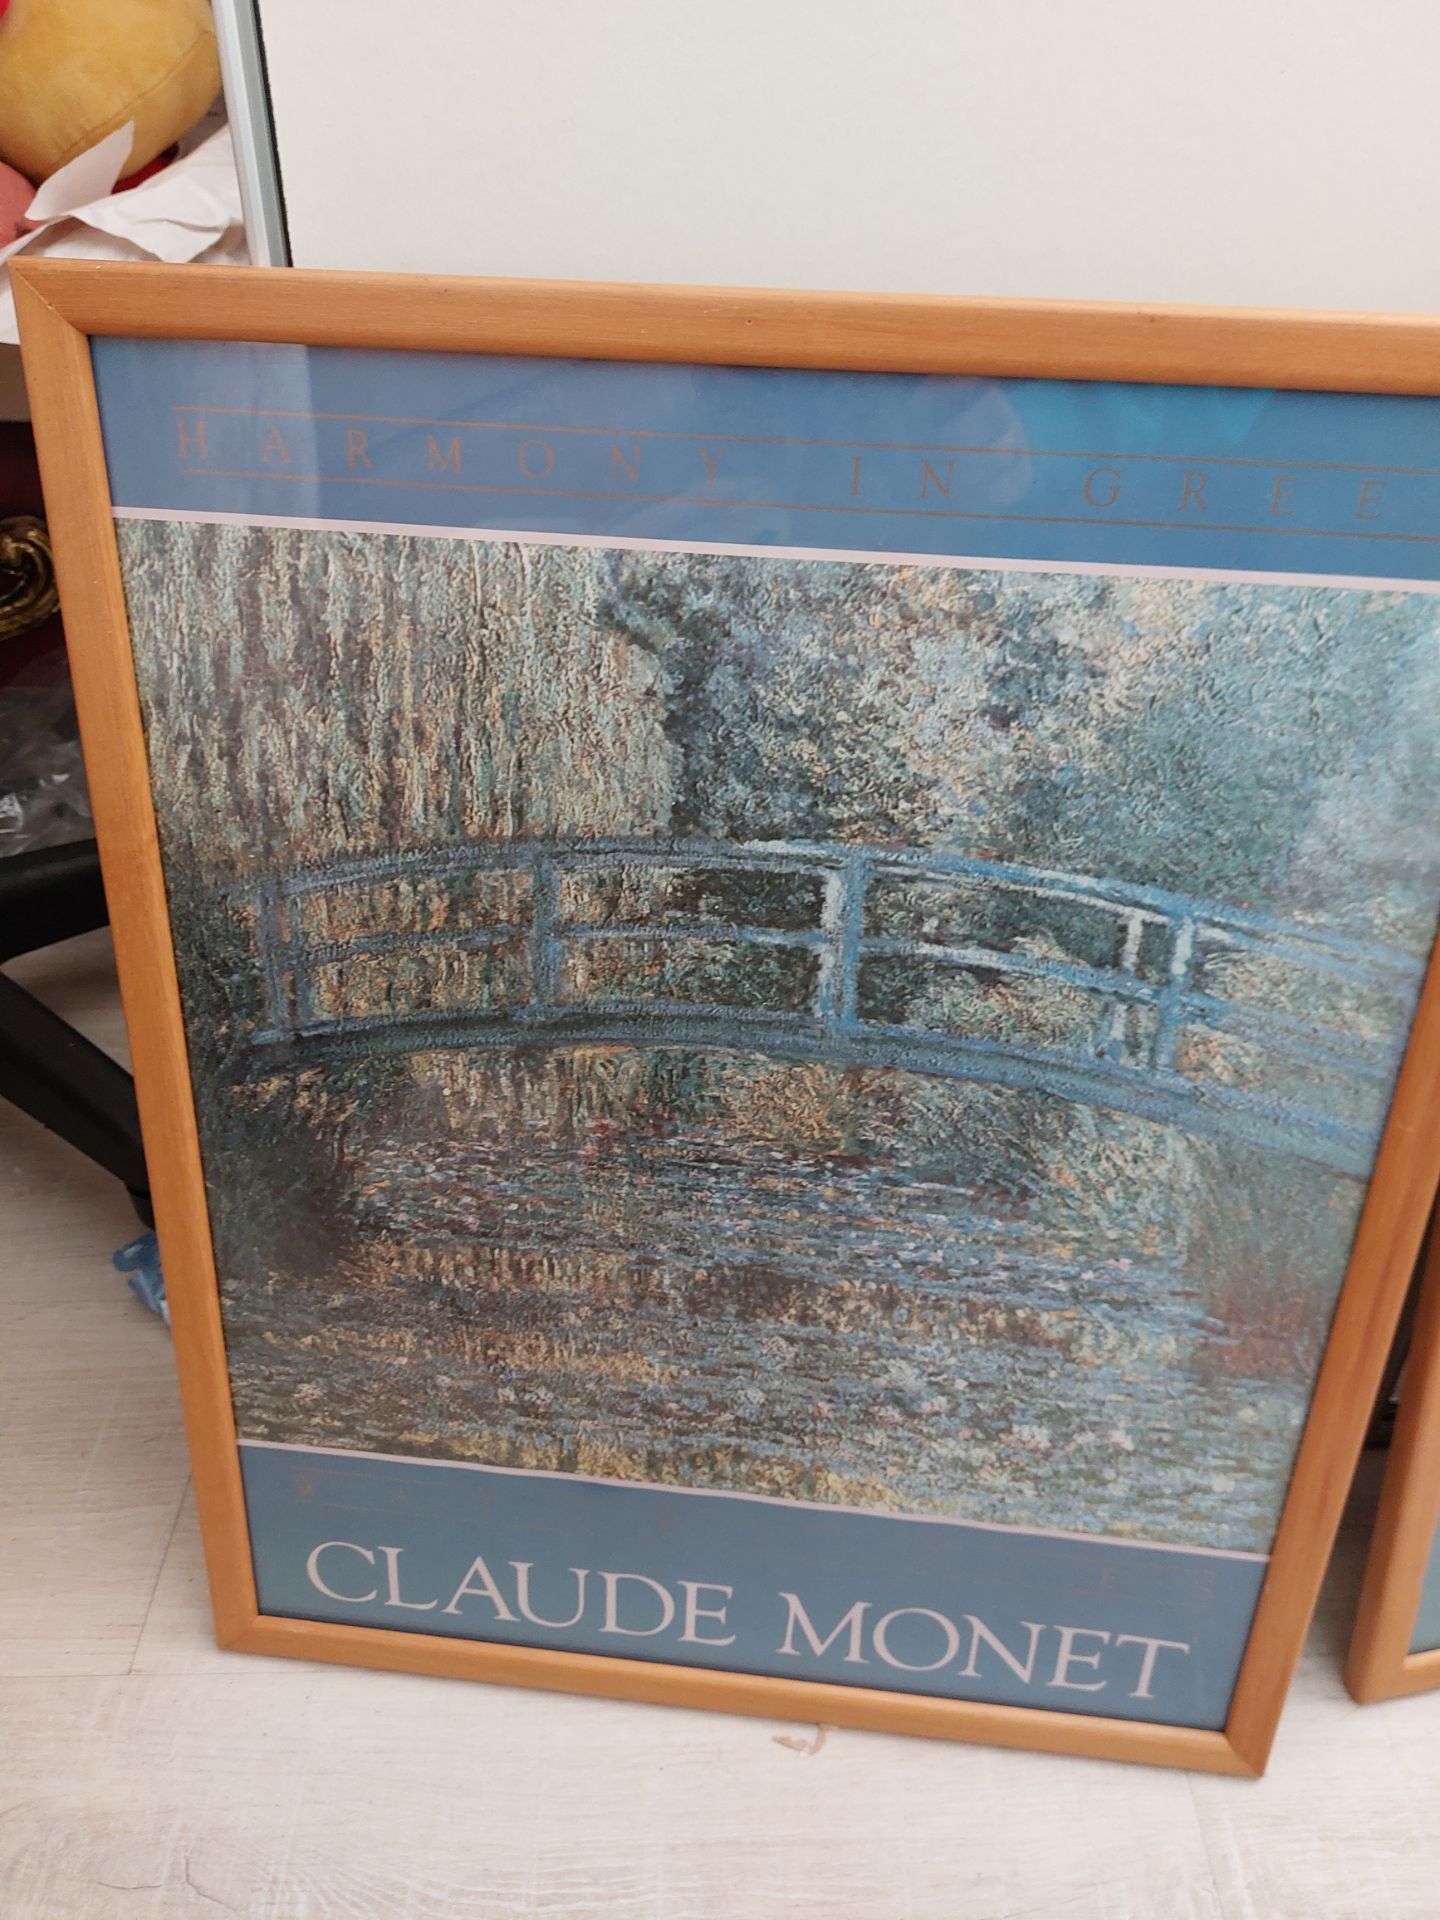 2 Monet Prints and 2 Cupboard Doors From Ikea - Image 2 of 4